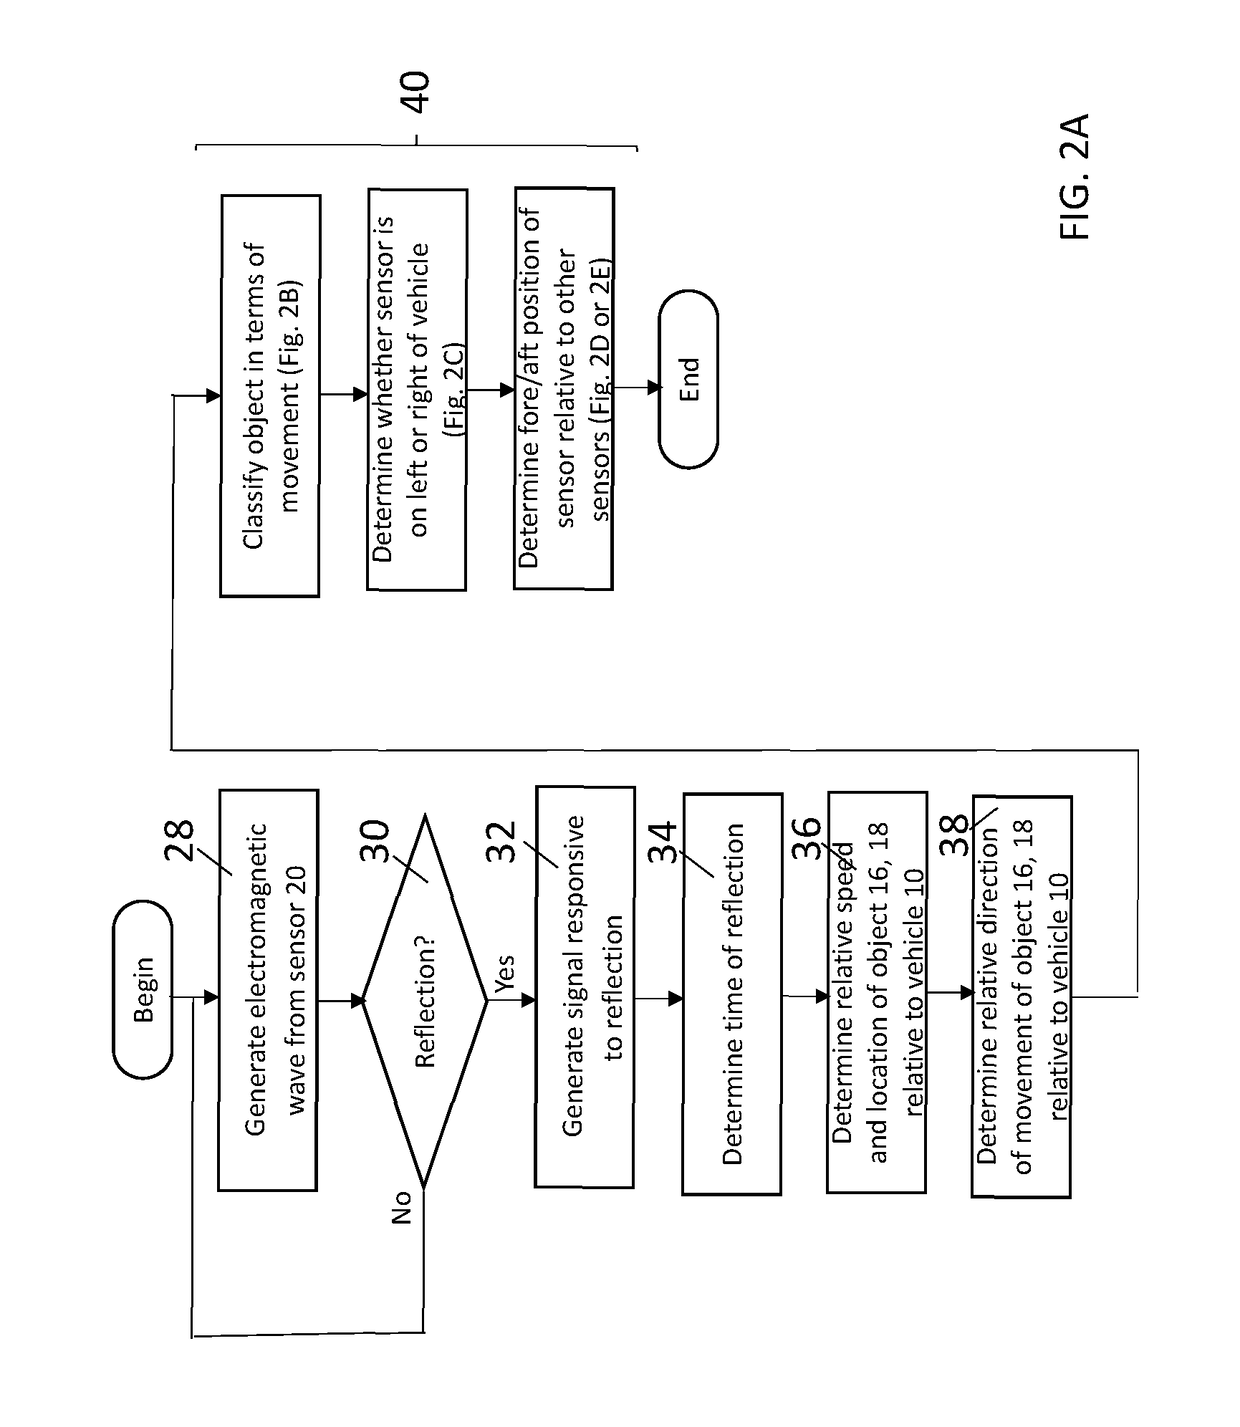 System and method for determining the positions of side collision avoidance sensors on a vehicle